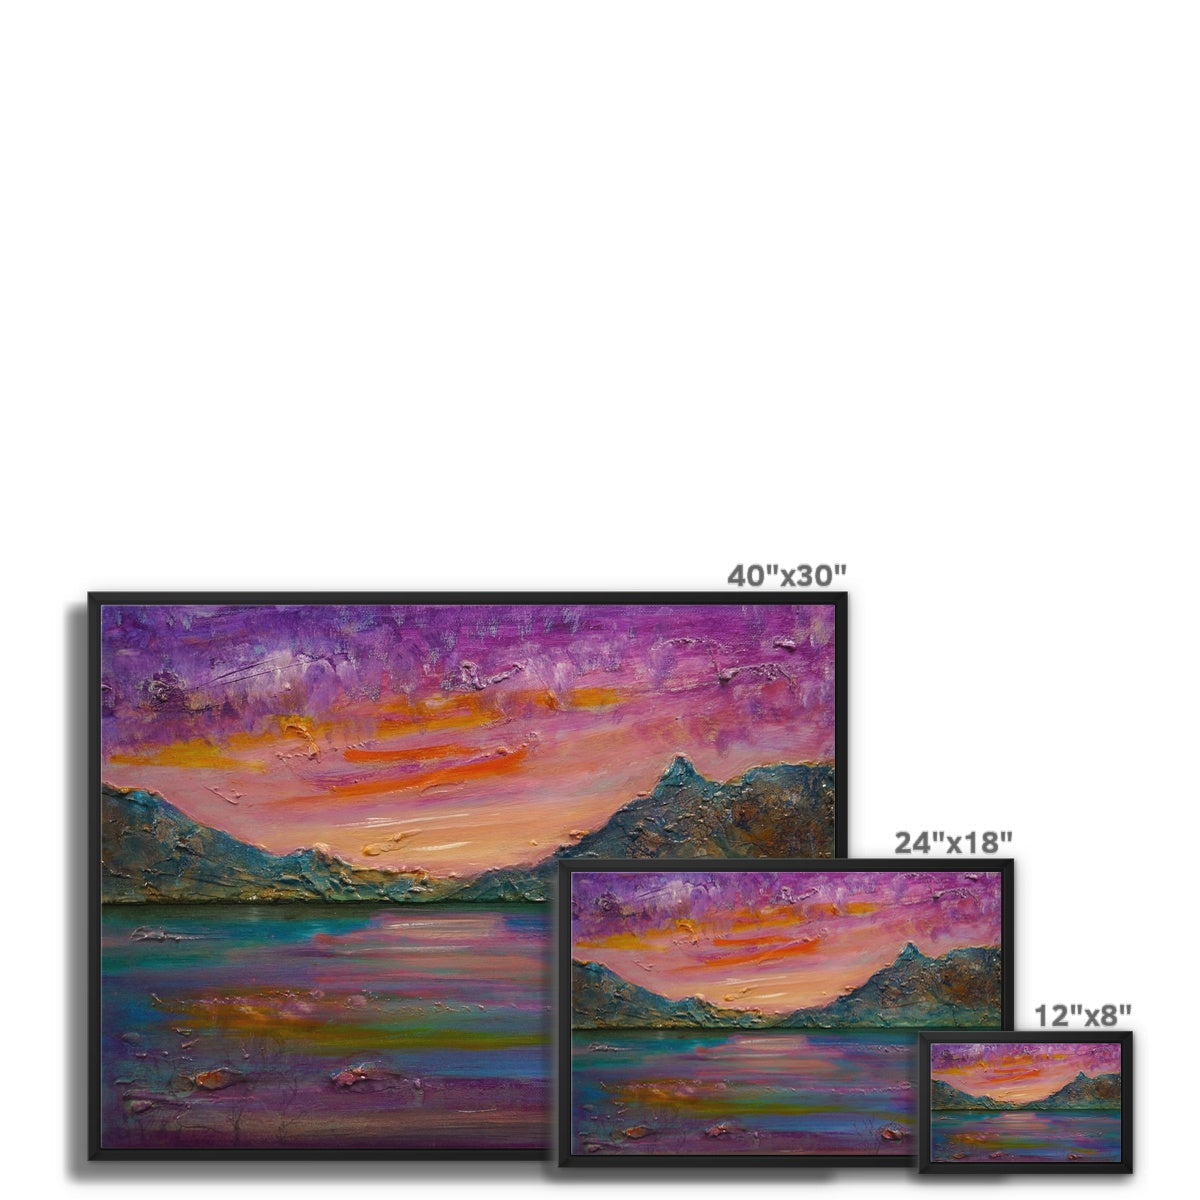 Loch Leven Sunset Painting | Framed Canvas From Scotland-Floating Framed Canvas Prints-Scottish Lochs & Mountains Art Gallery-Paintings, Prints, Homeware, Art Gifts From Scotland By Scottish Artist Kevin Hunter